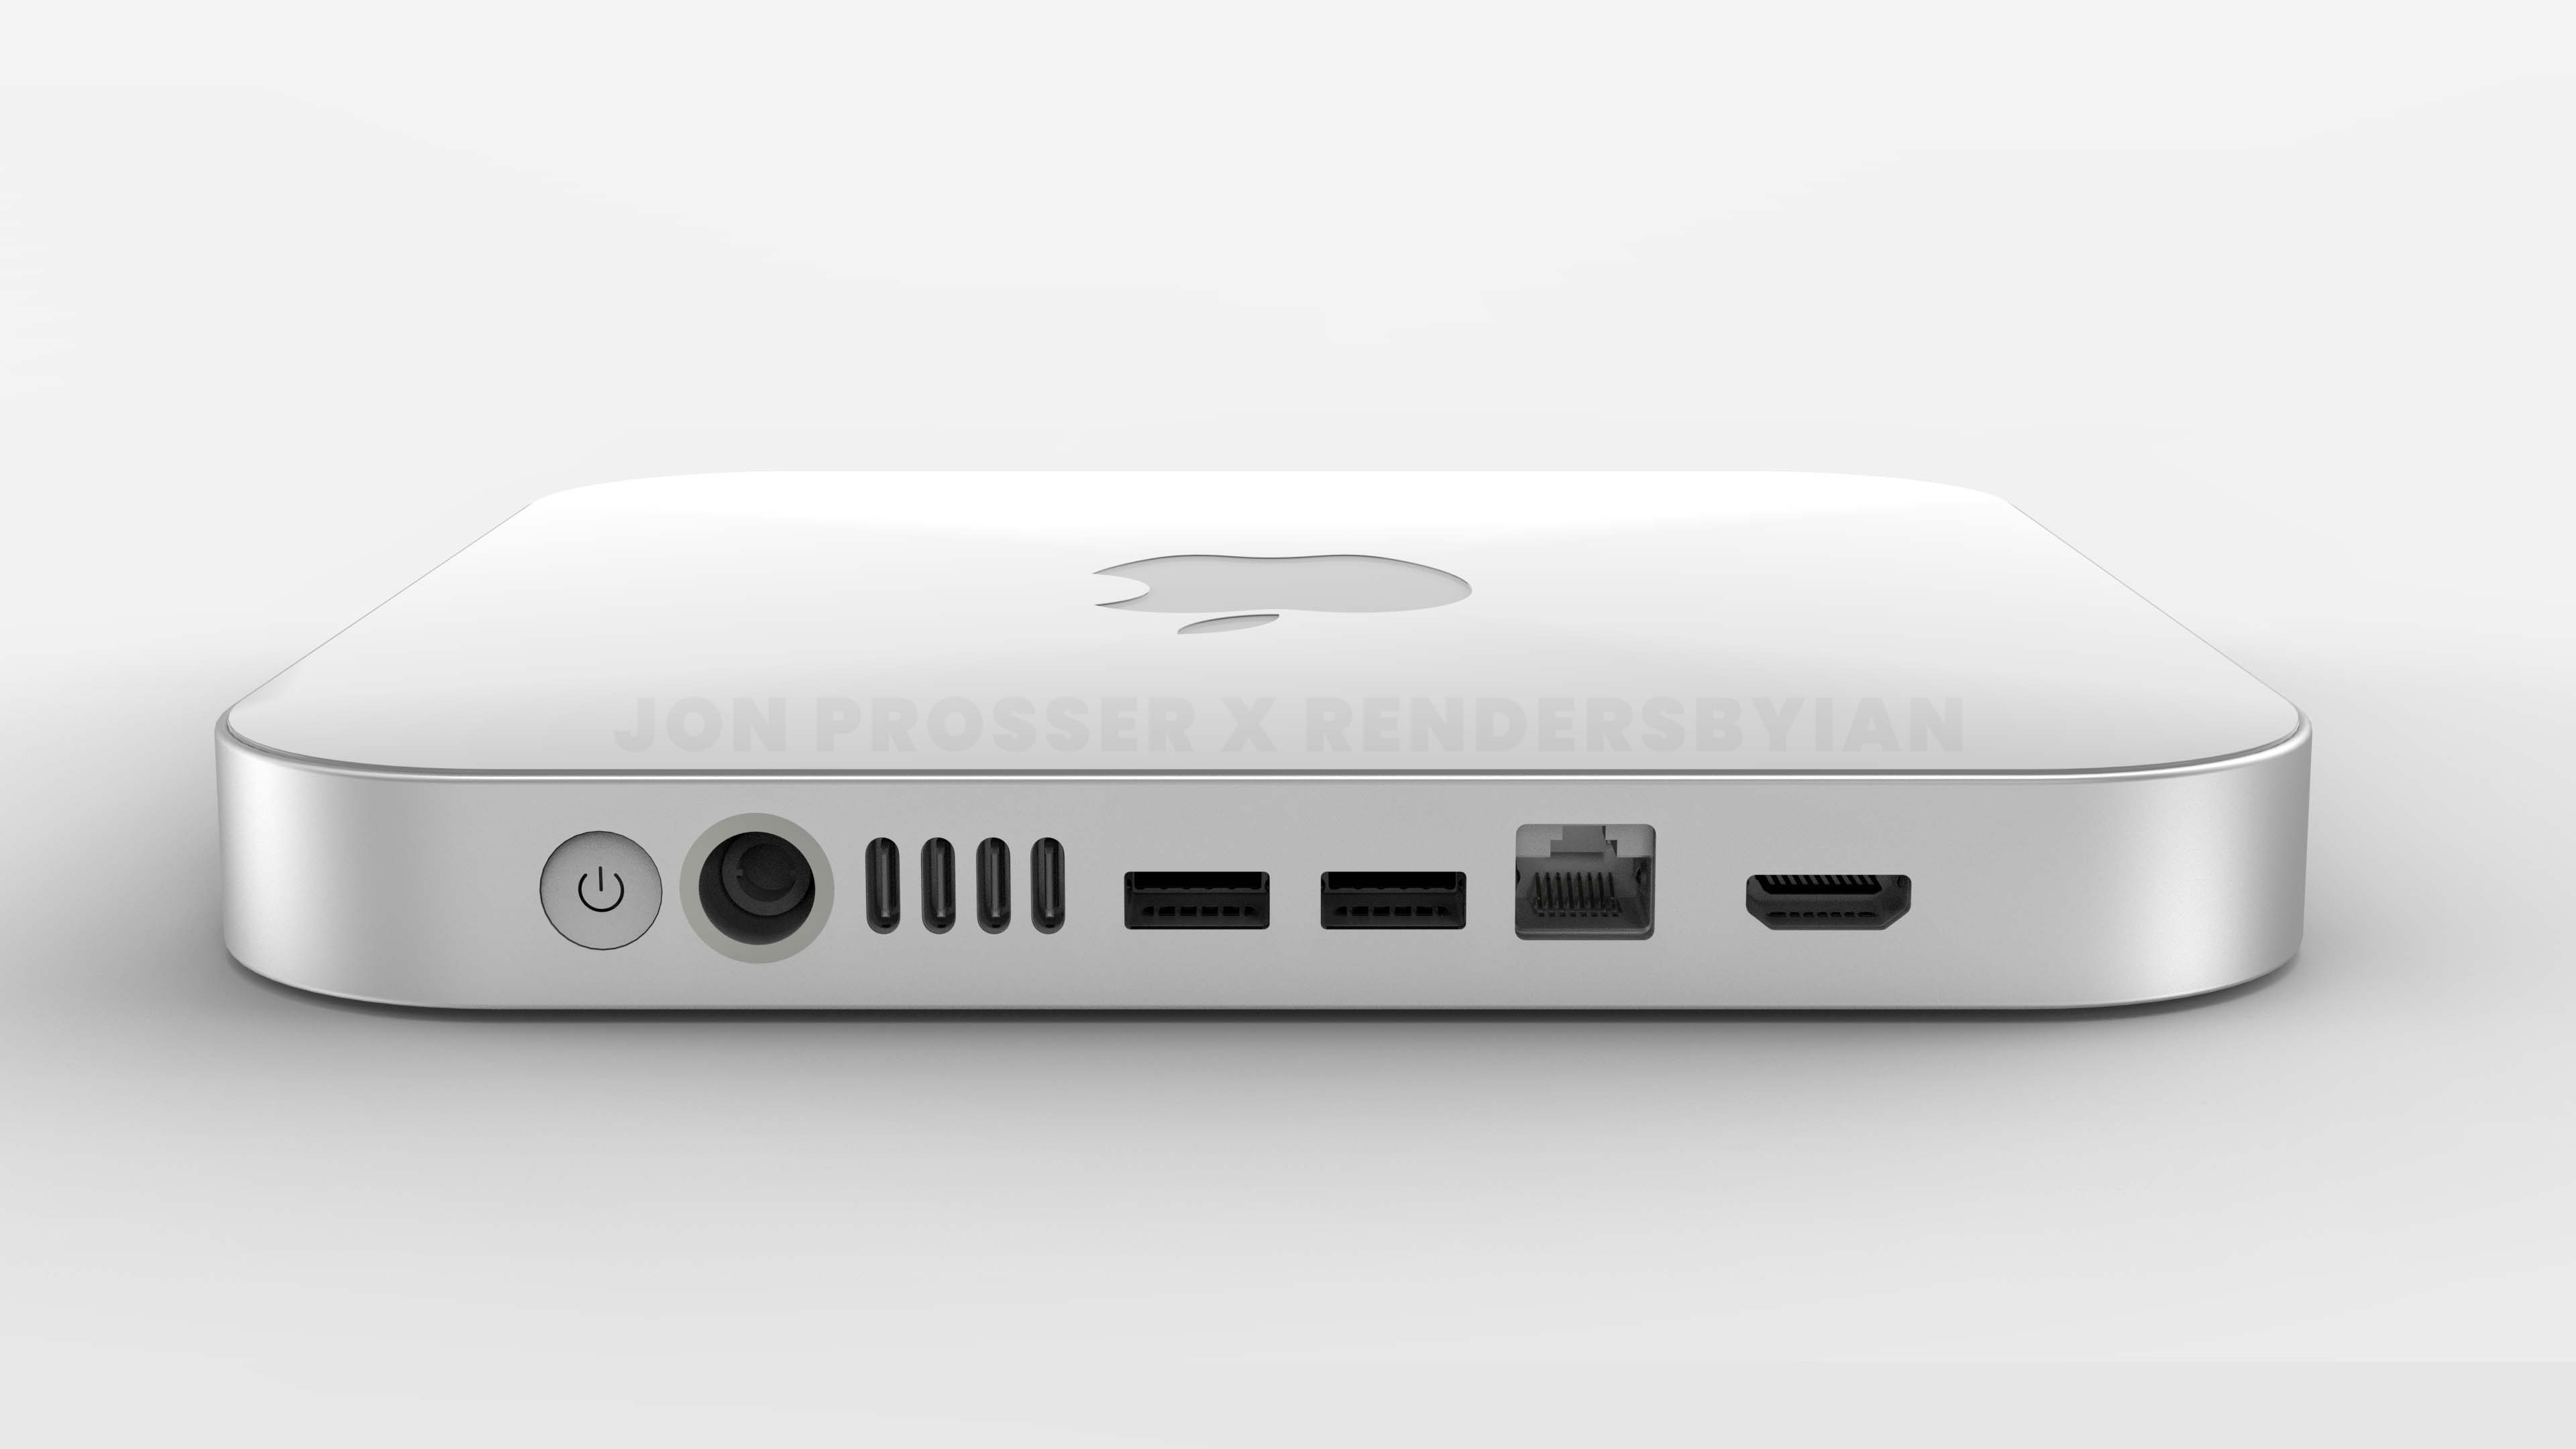 The new Mac mini just leaked - what you need to know